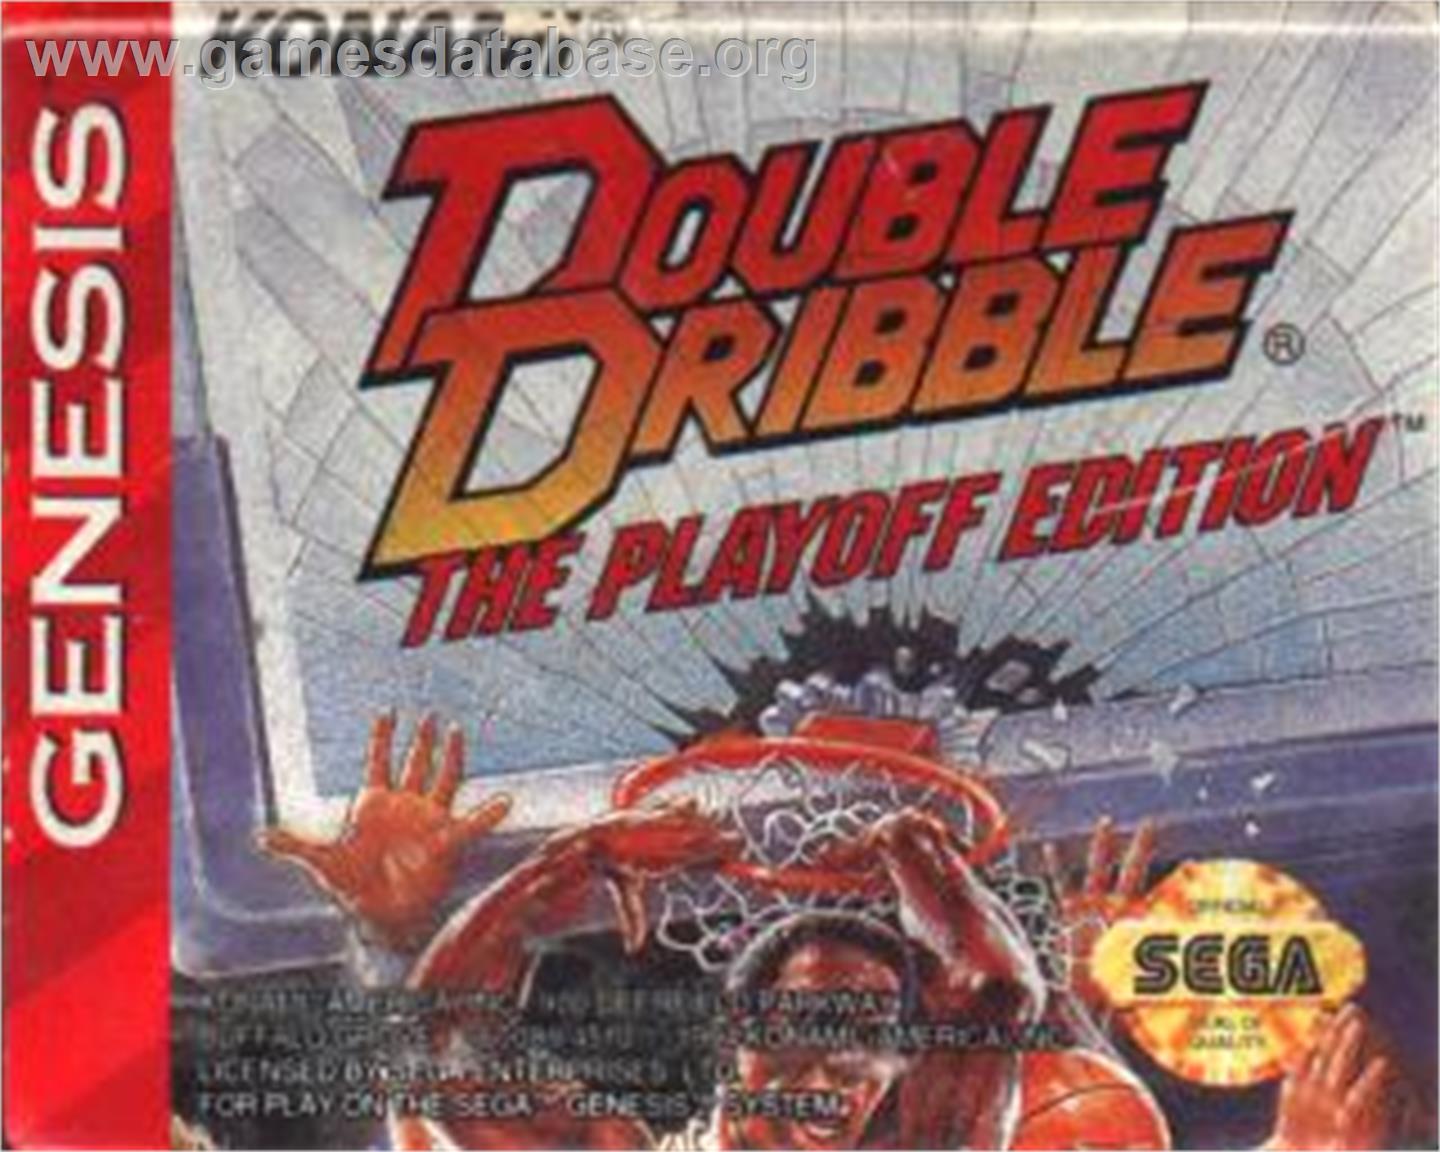 Double Dribble: The Playoff Edition - Sega Nomad - Artwork - Cartridge